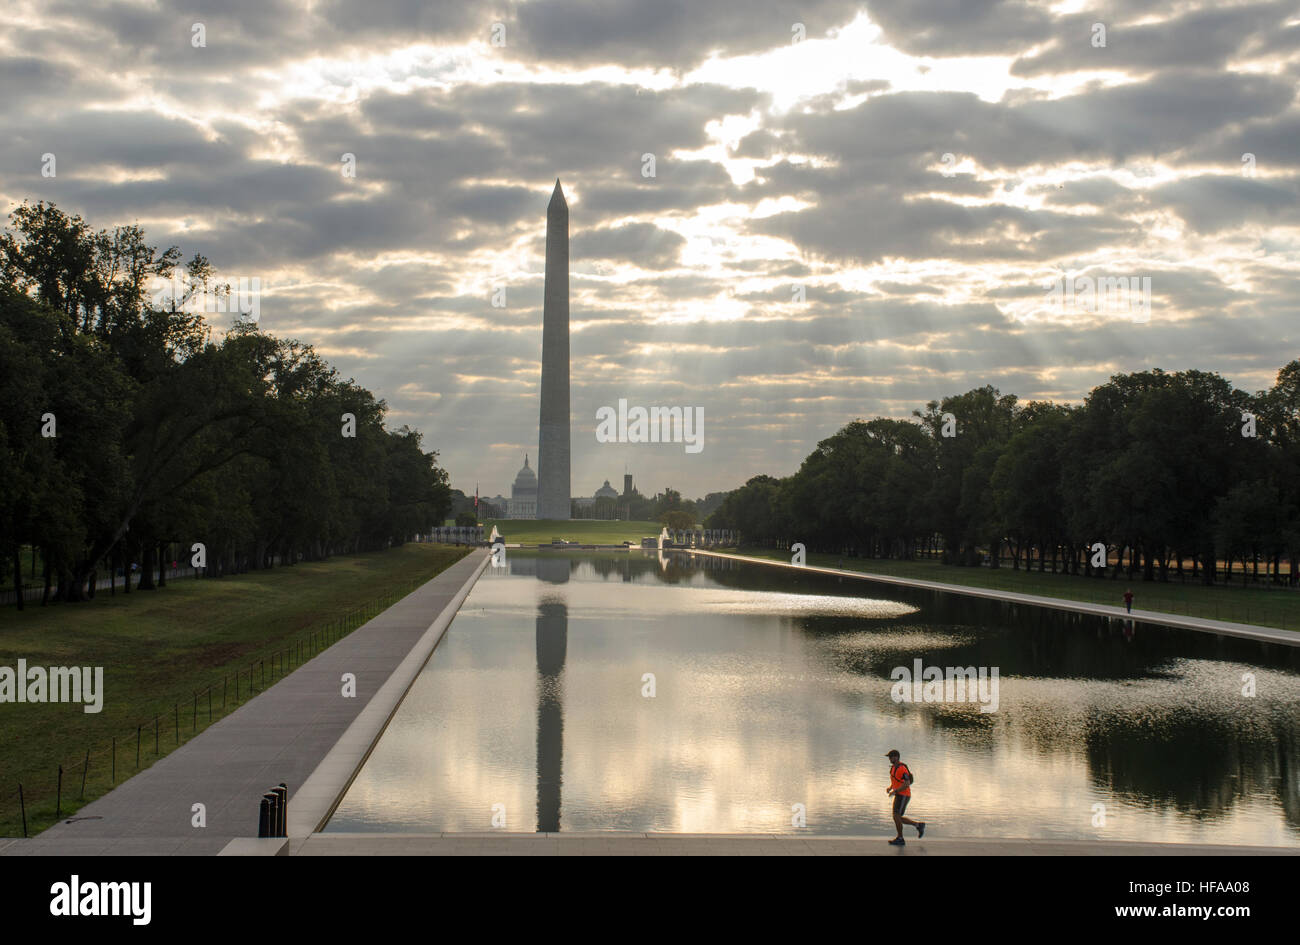 Washington Monument and Reflecting Pool seen from the Lincoln Memorial in Washington DC. Stock Photo